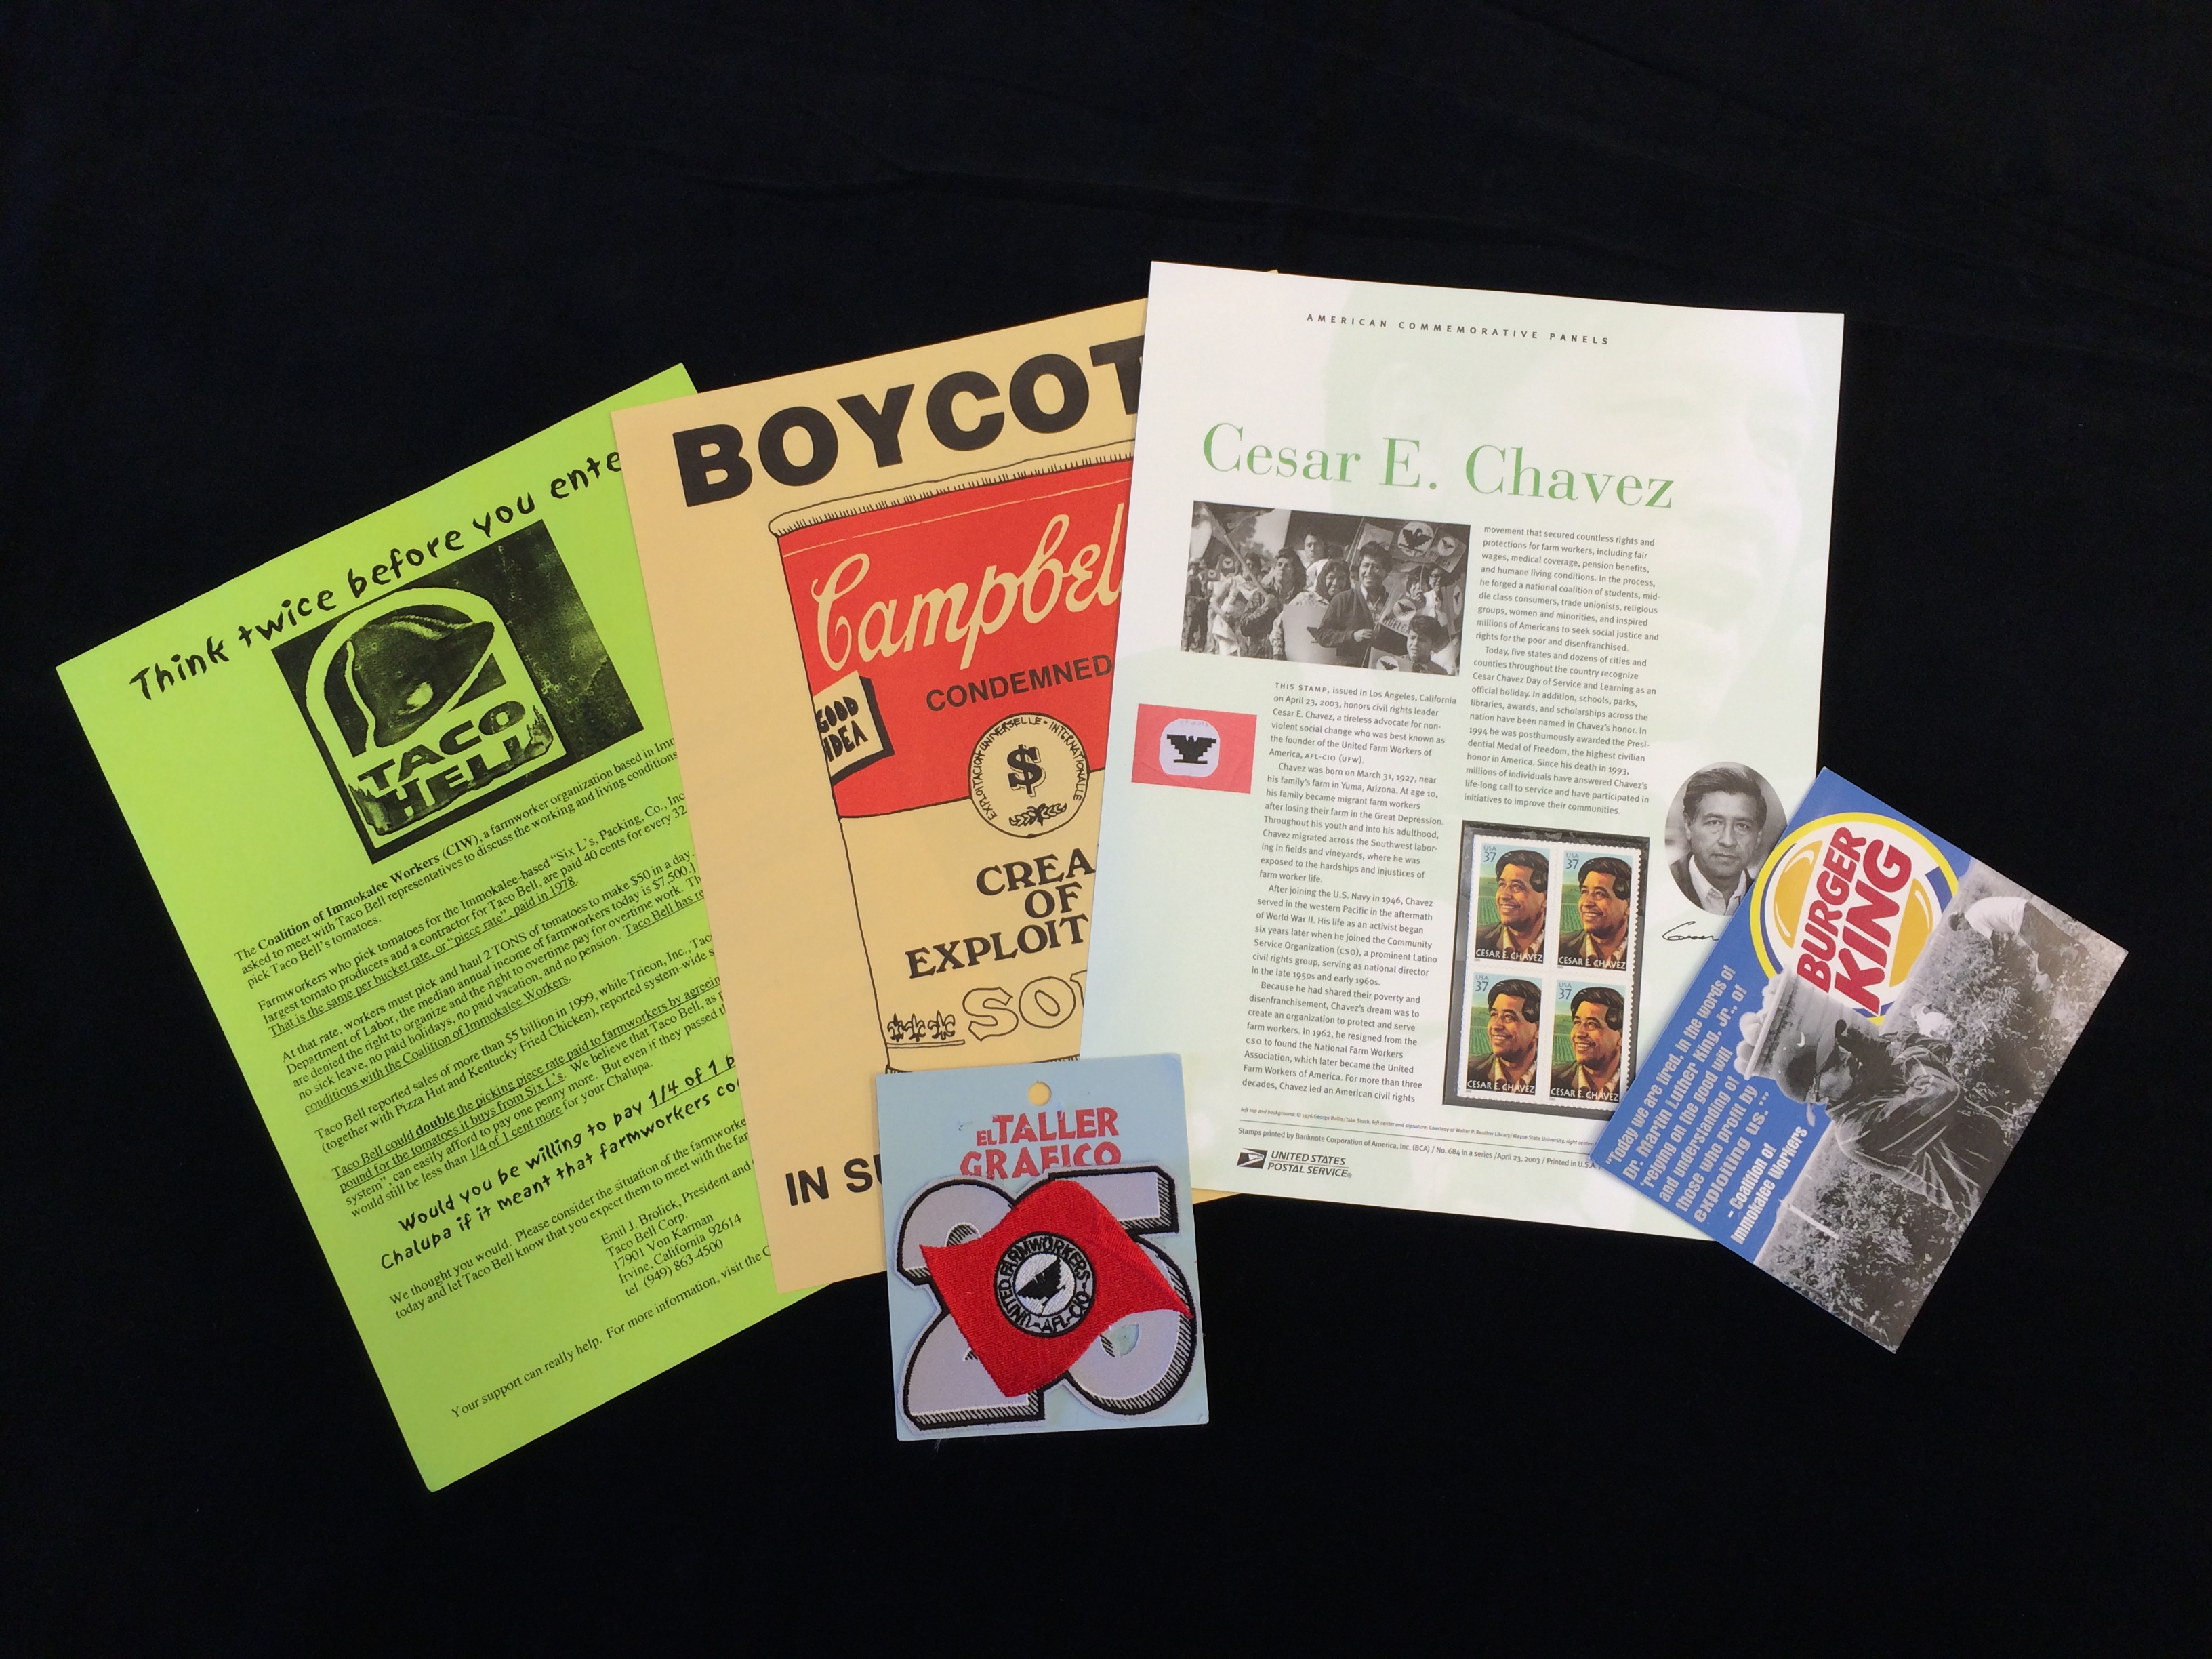 Labor-related materials from the Joseph A. Labadie Collection